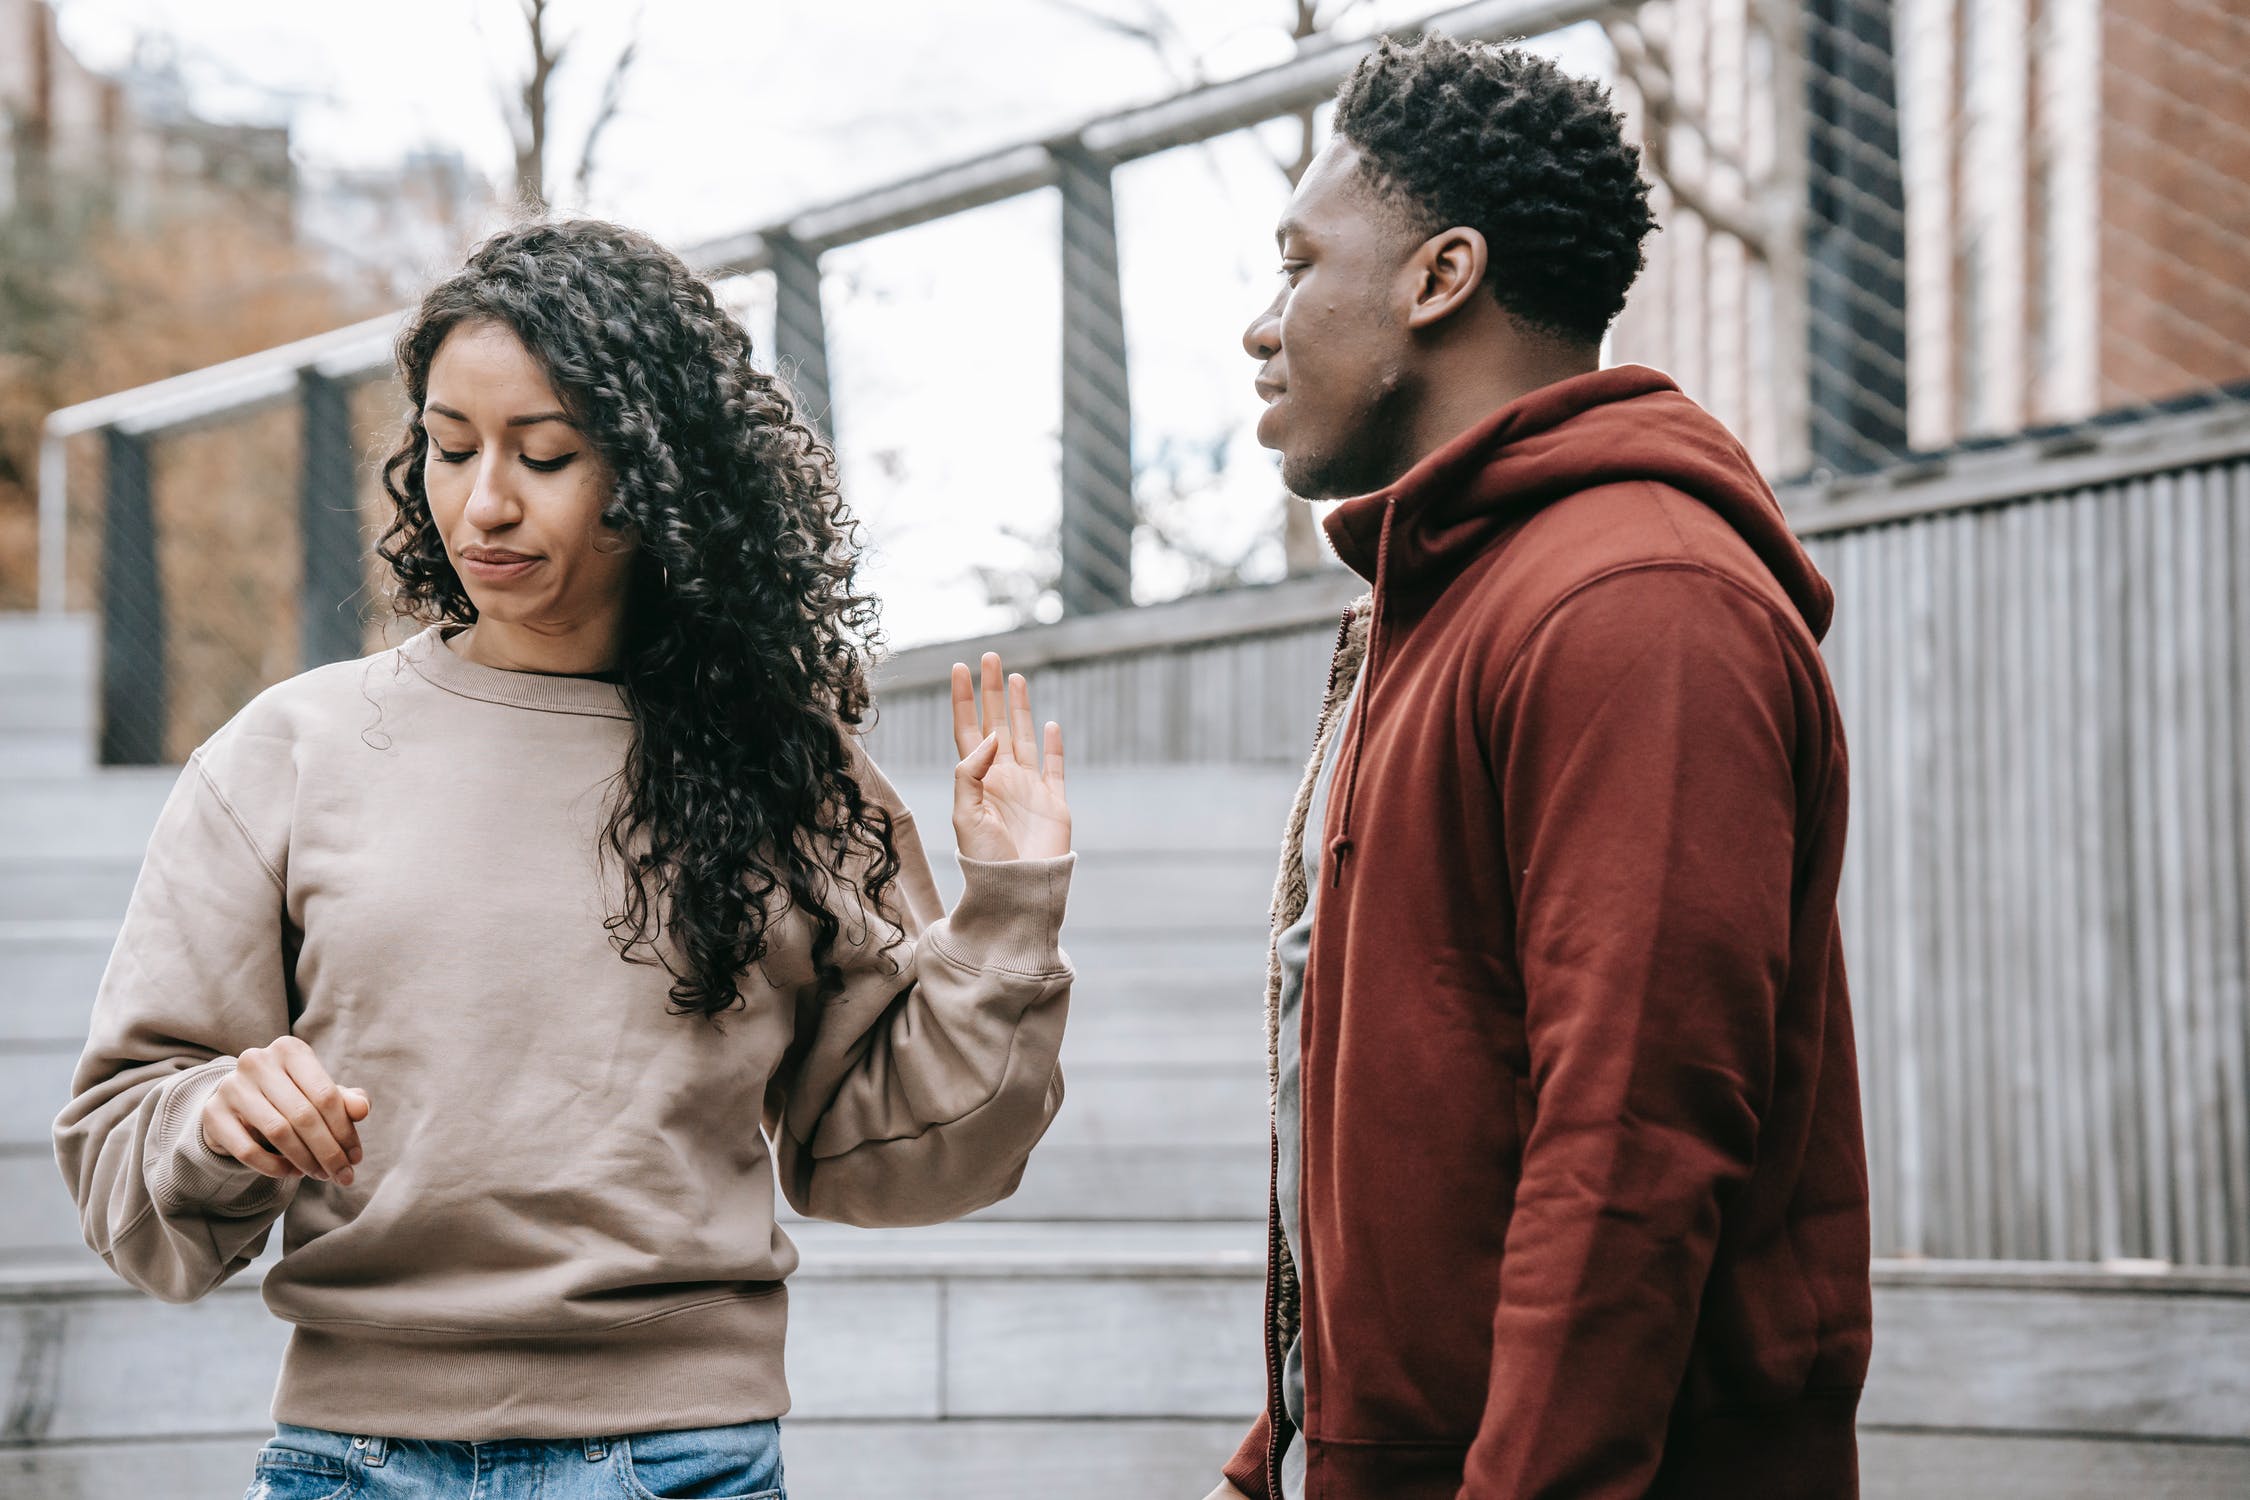 How to Deal with Conflict in a Relationship - 5 Strategies That Work